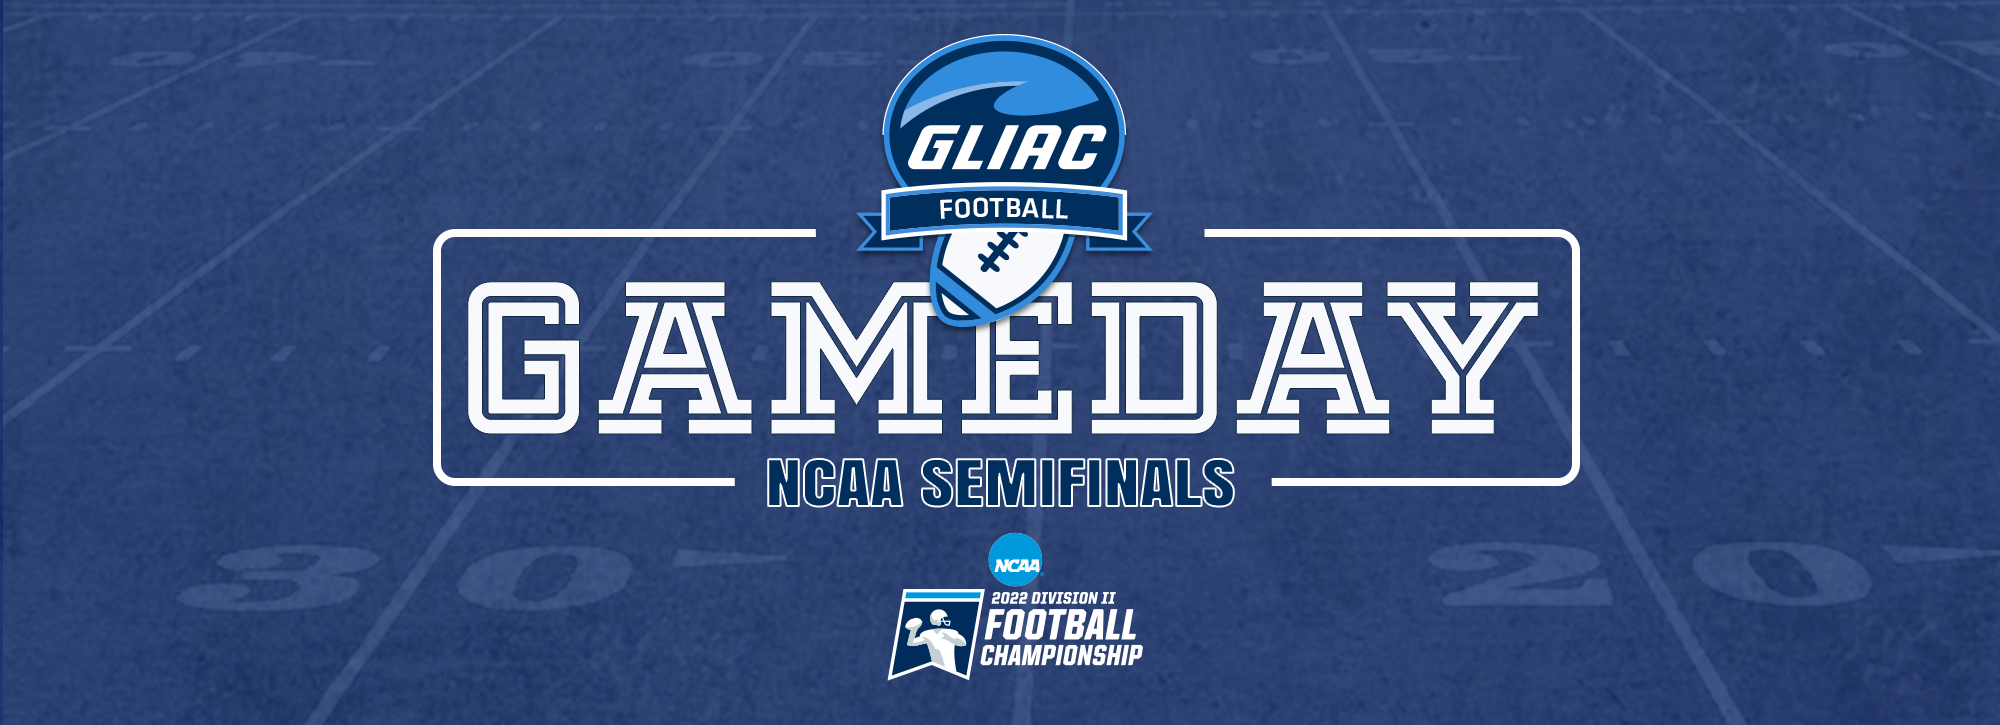 Five GLIAC teams in action on Thursday to kickoff 2022 campaign